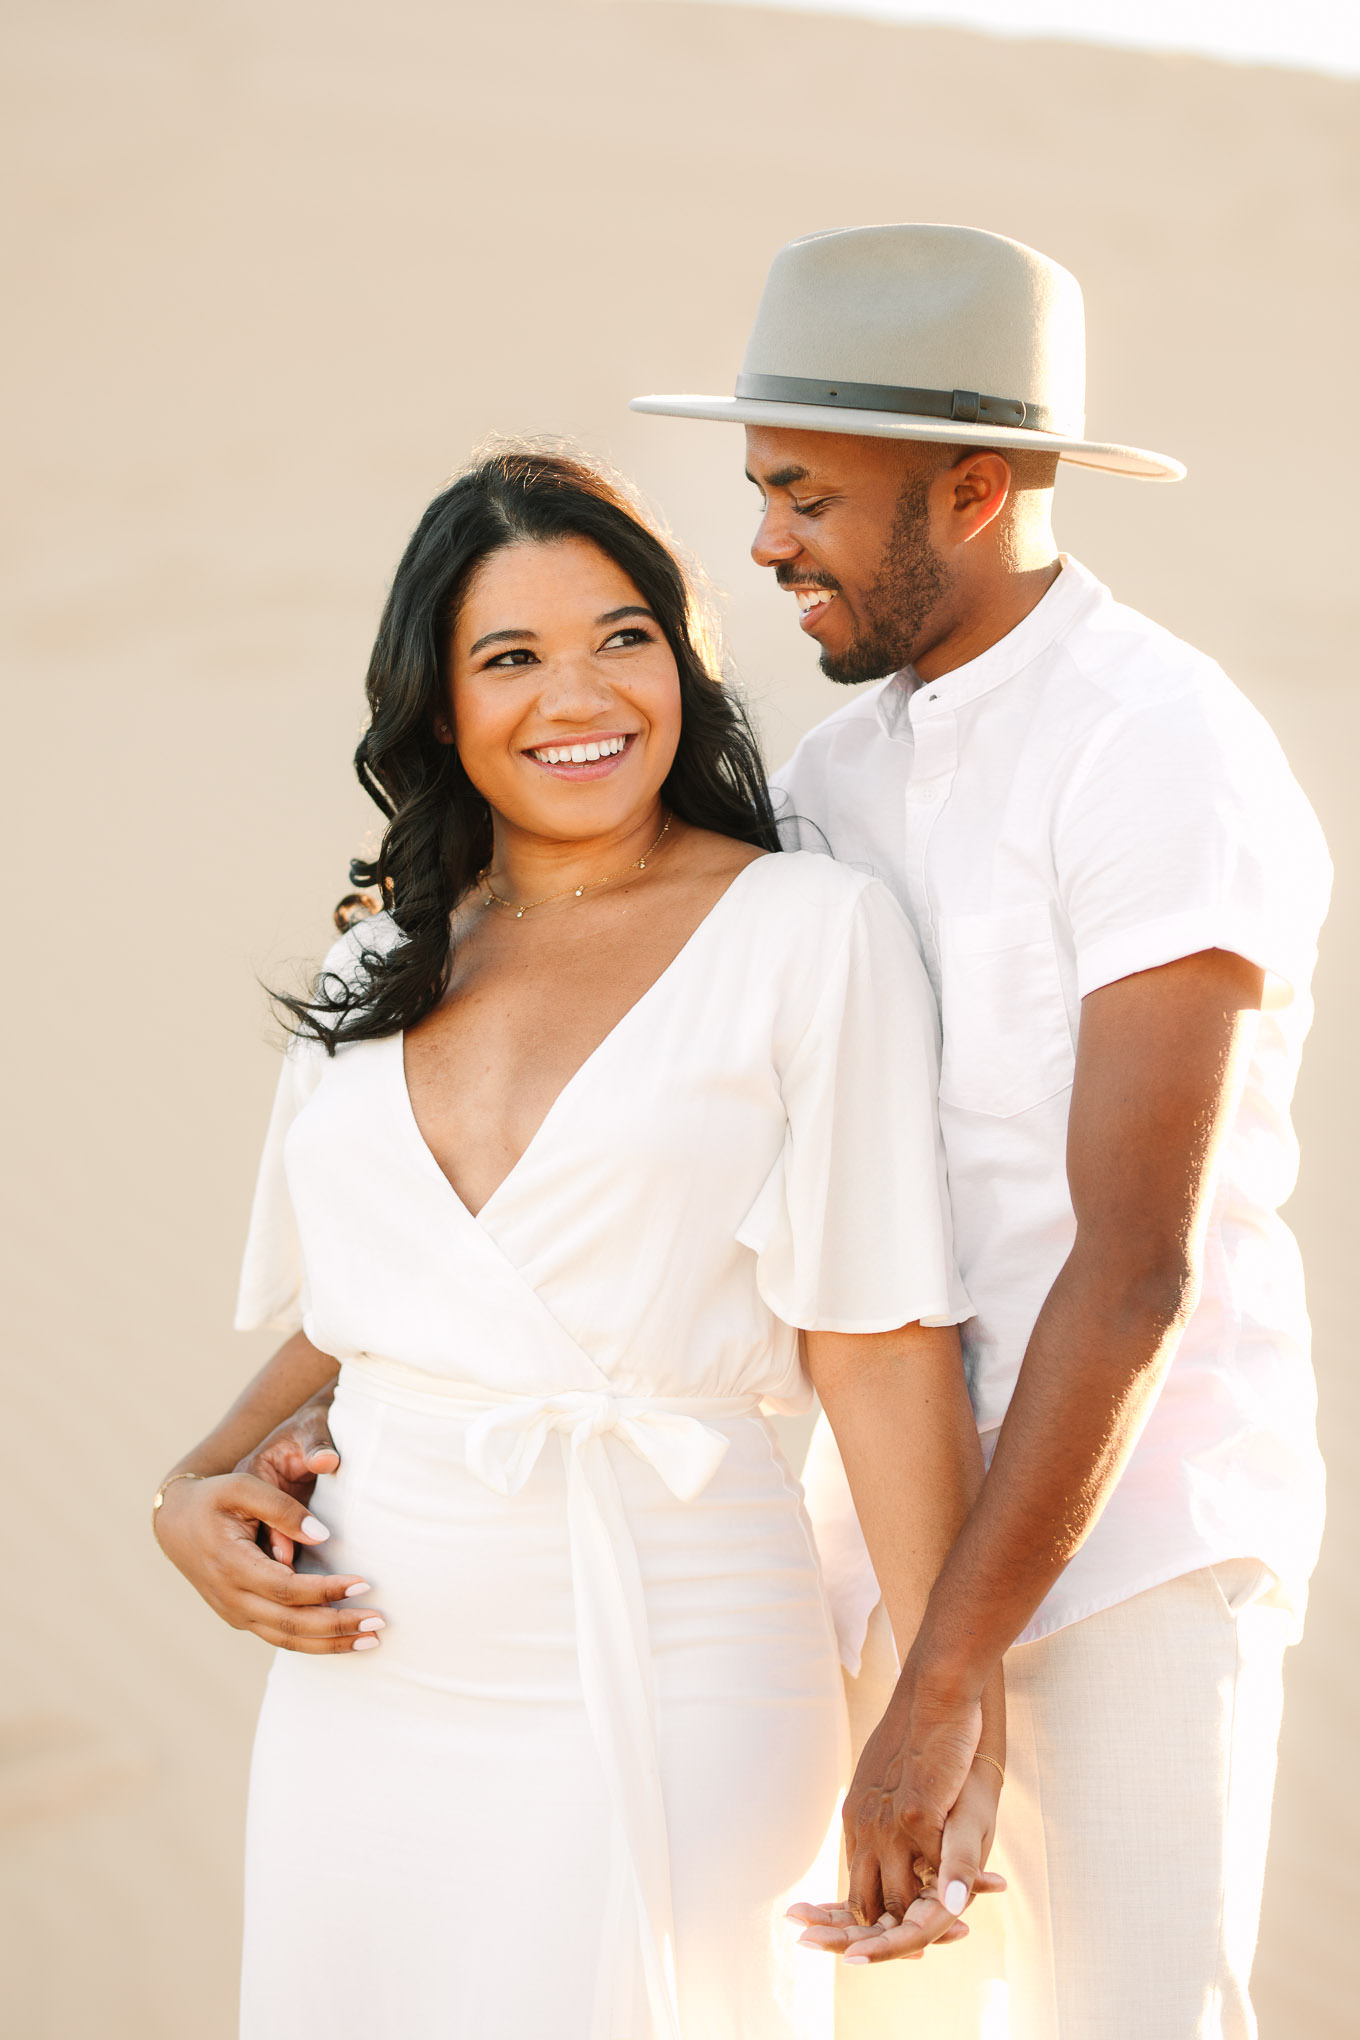 Sunset portrait | California Sand Dunes engagement session | Colorful Palm Springs wedding photography | #palmspringsphotographer #sanddunes #engagementsession #southerncalifornia  Source: Mary Costa Photography | Los Angeles